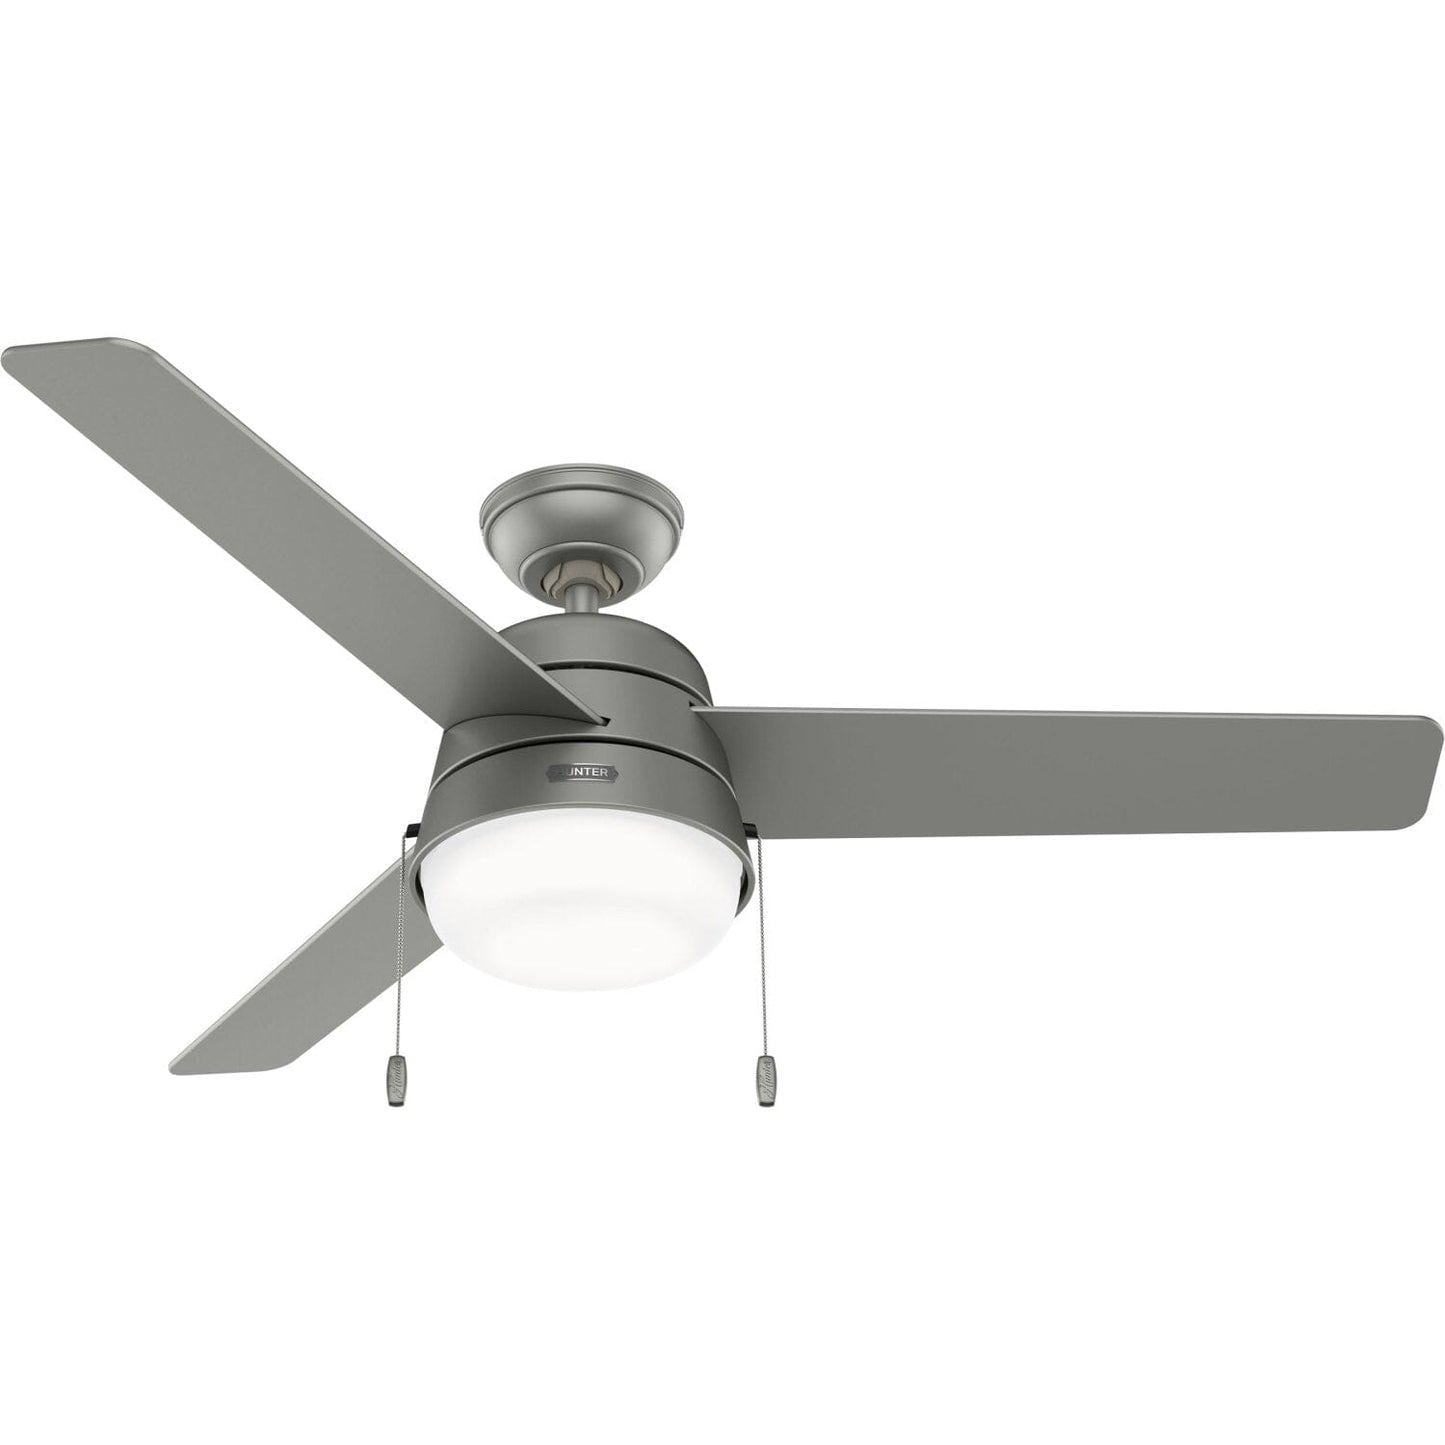 Aker Outdoor with LED Light 52 inch Ceiling Fans Hunter Matte Silver - Matte Silver 